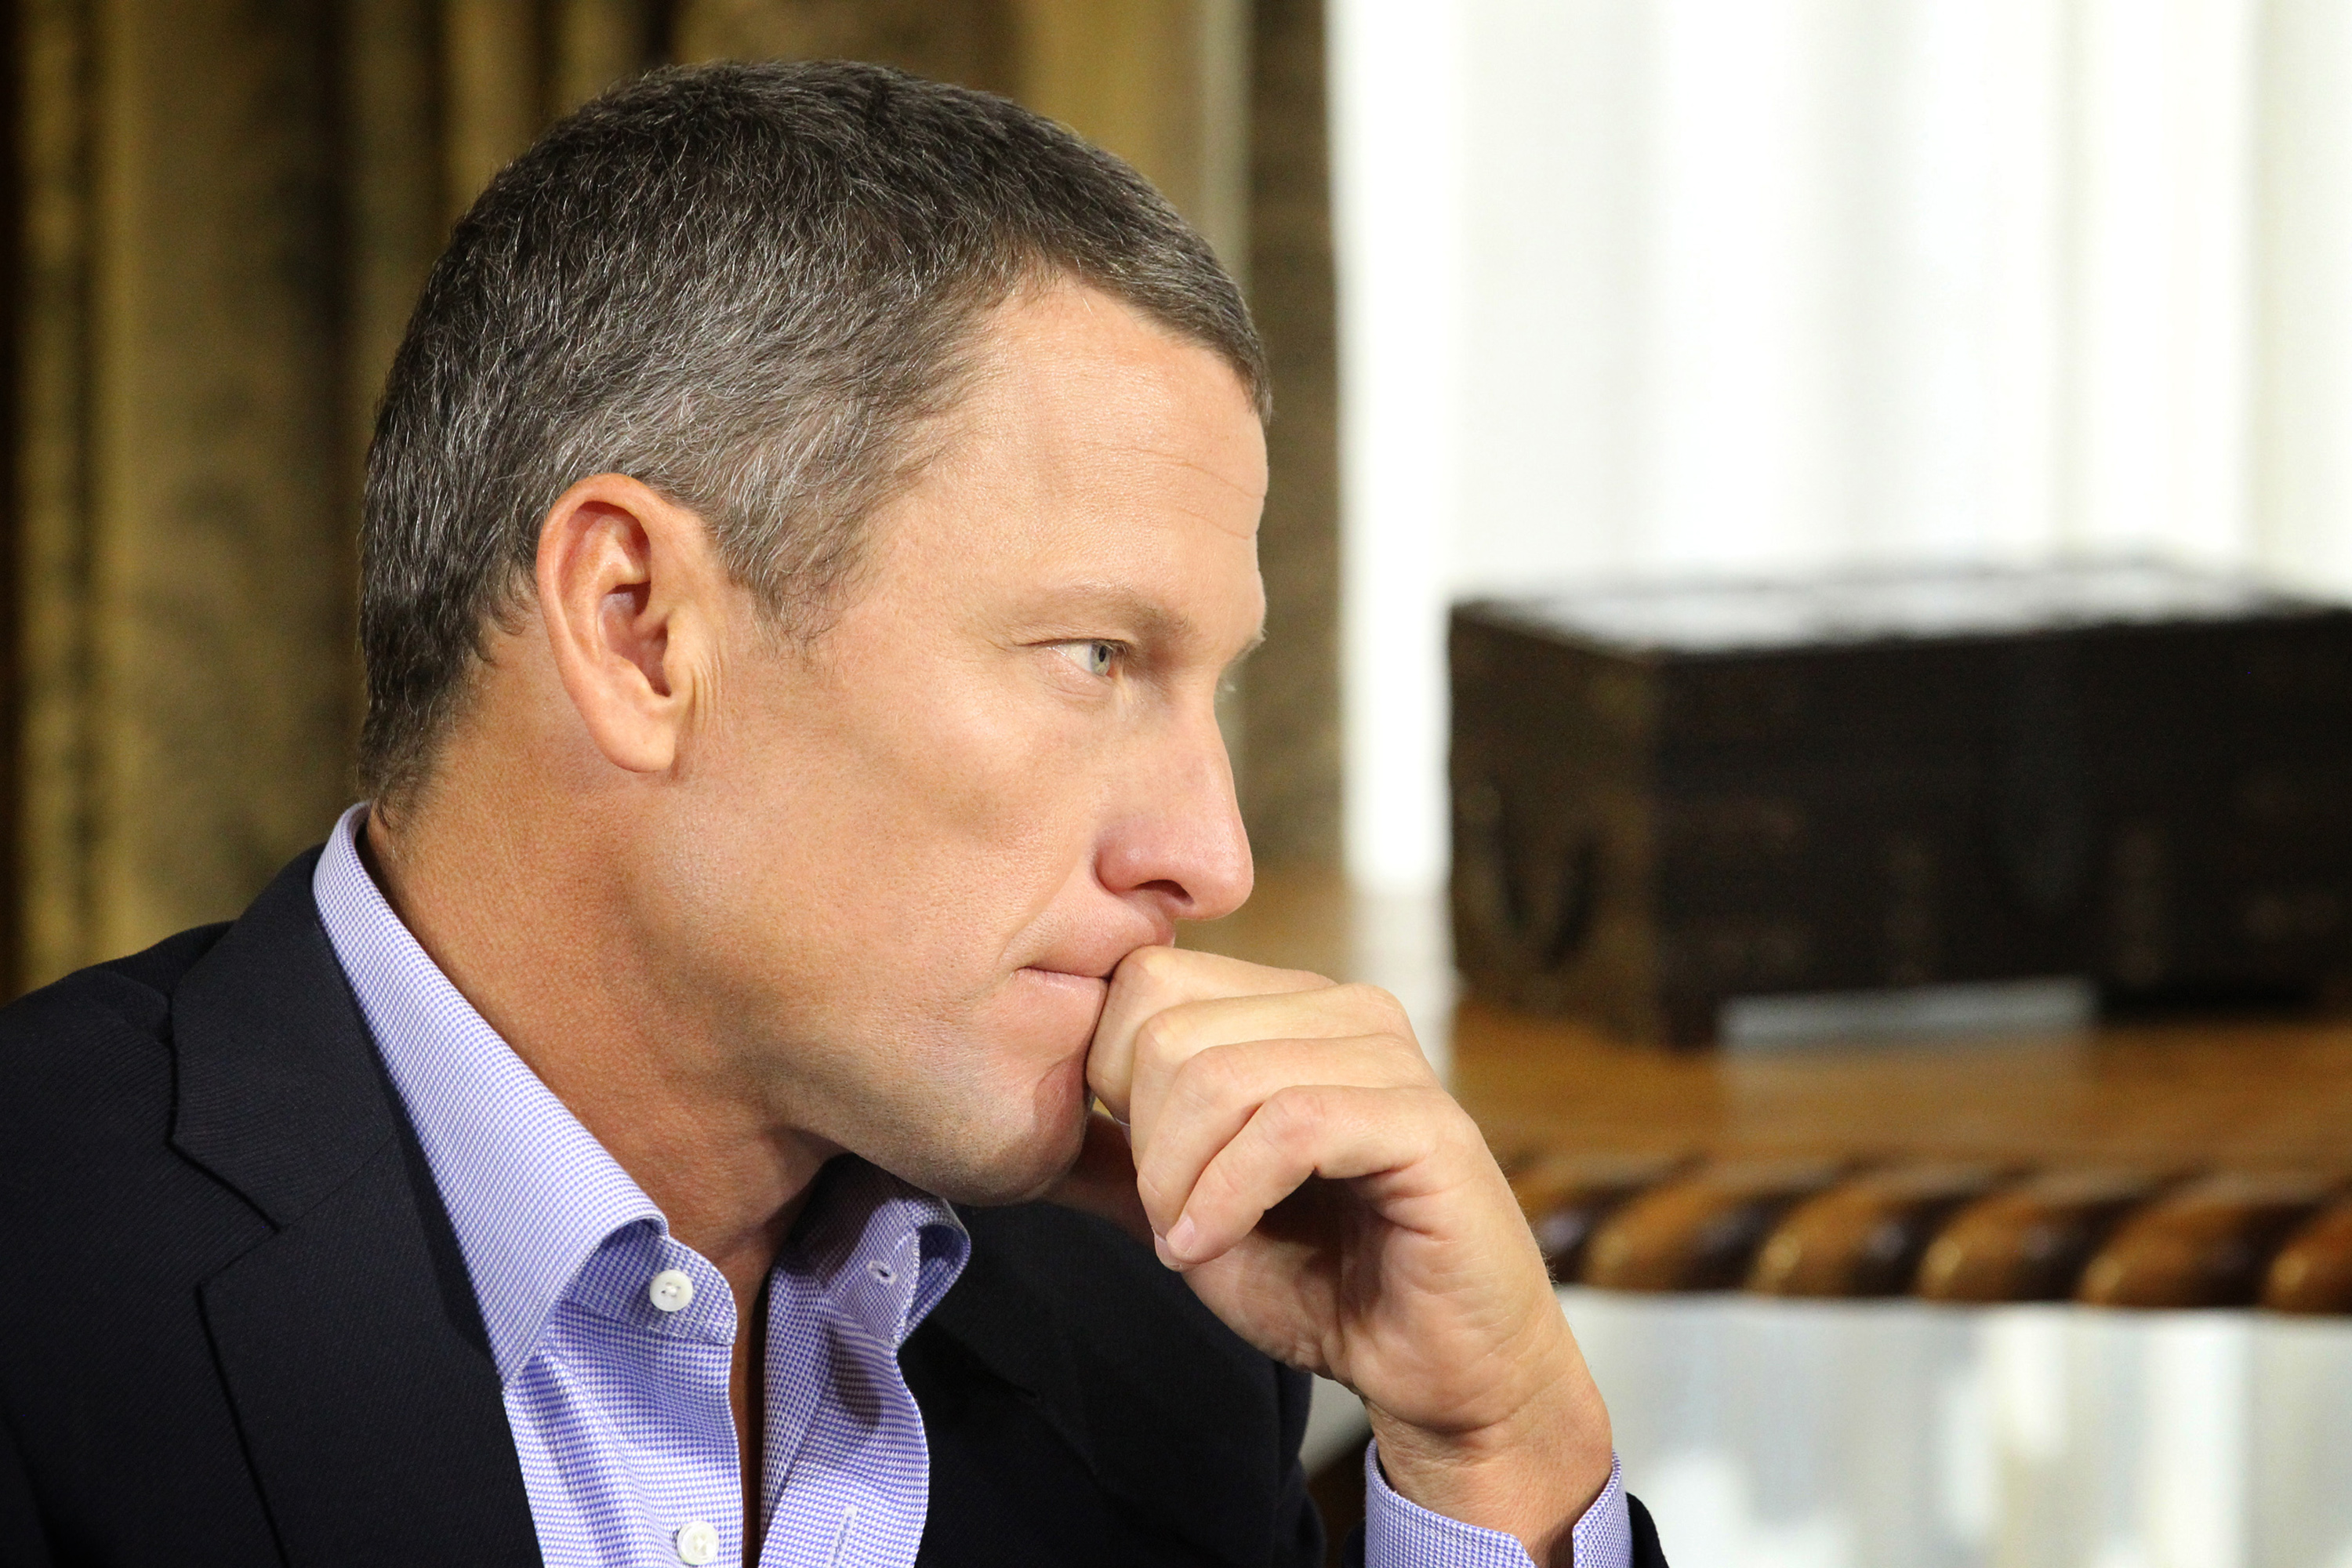 Disgraced Cyclist Lance Armstrong Is Tied to Yet Another Controversy